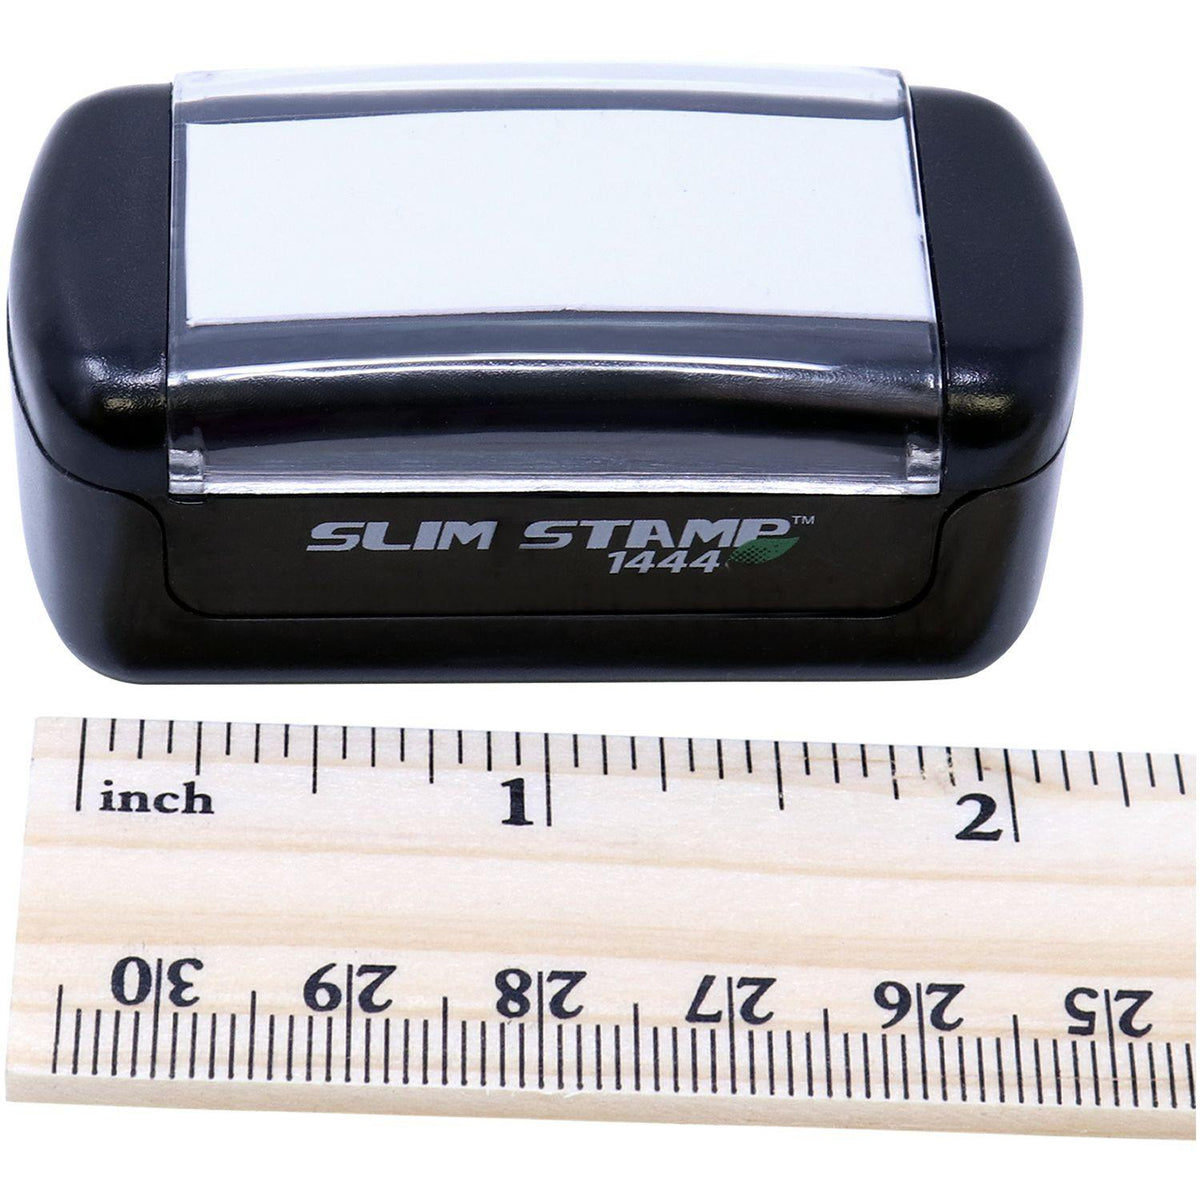 Measurement Slim Pre-Inked Great Stamp with Ruler